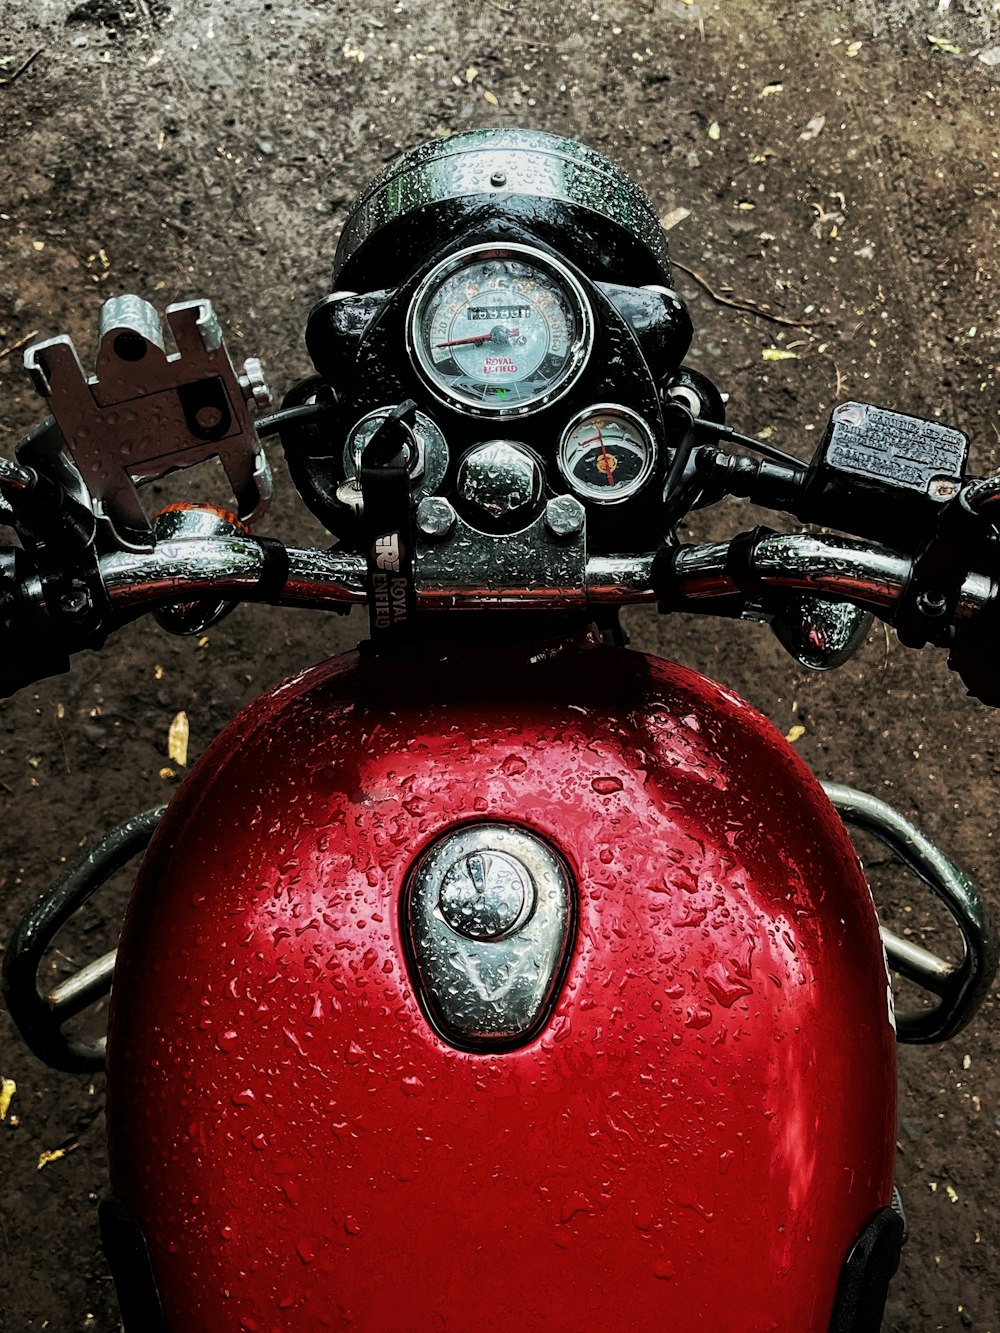 a close up of a motorcycle handle bar